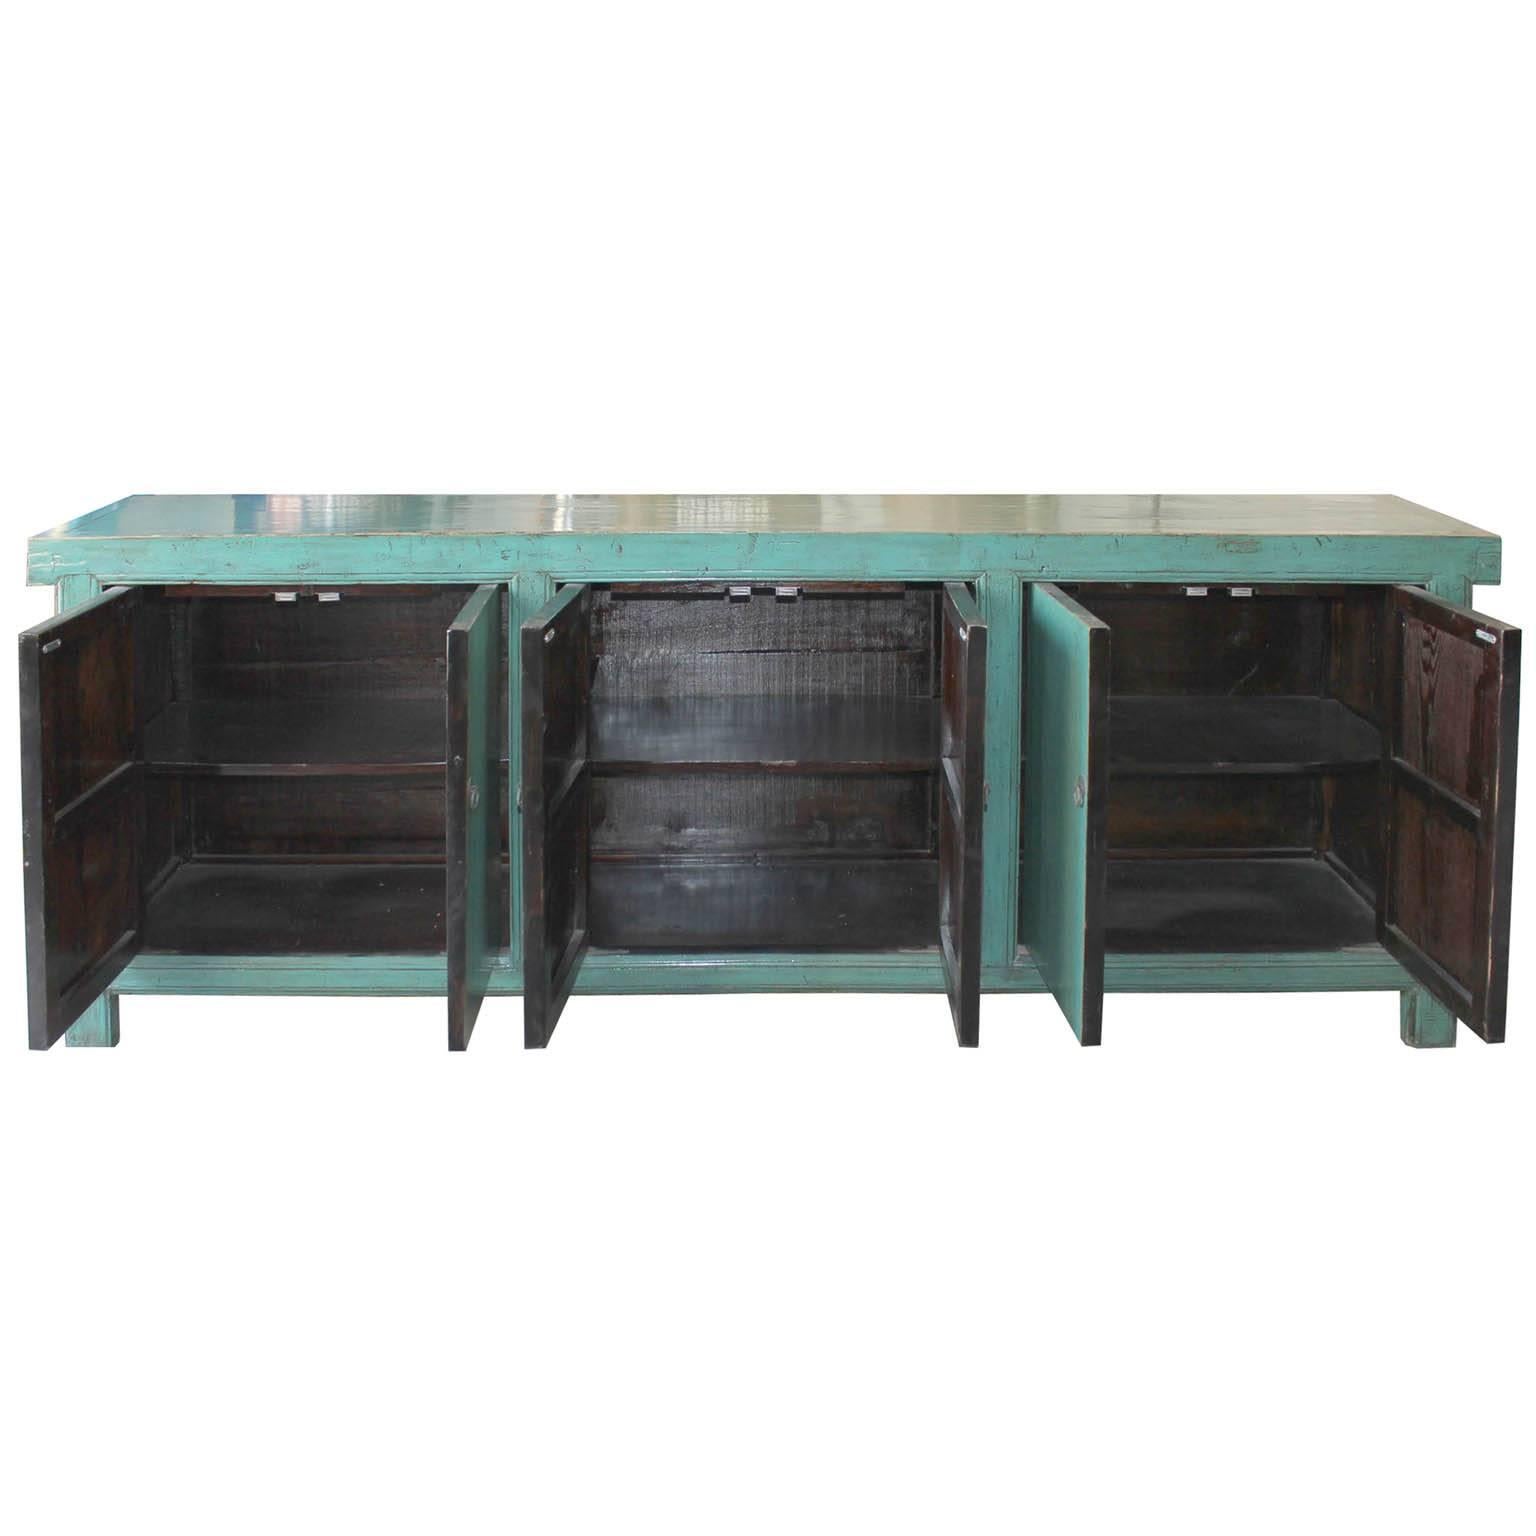 Six-door turquoise lacquer buffet would be a pop of color in any contemporary room. Clean lines, simple hardware, with lots of storage makes this sideboard ideal underneath a large piece of art work or flat screen TV. New shelving and hardware.